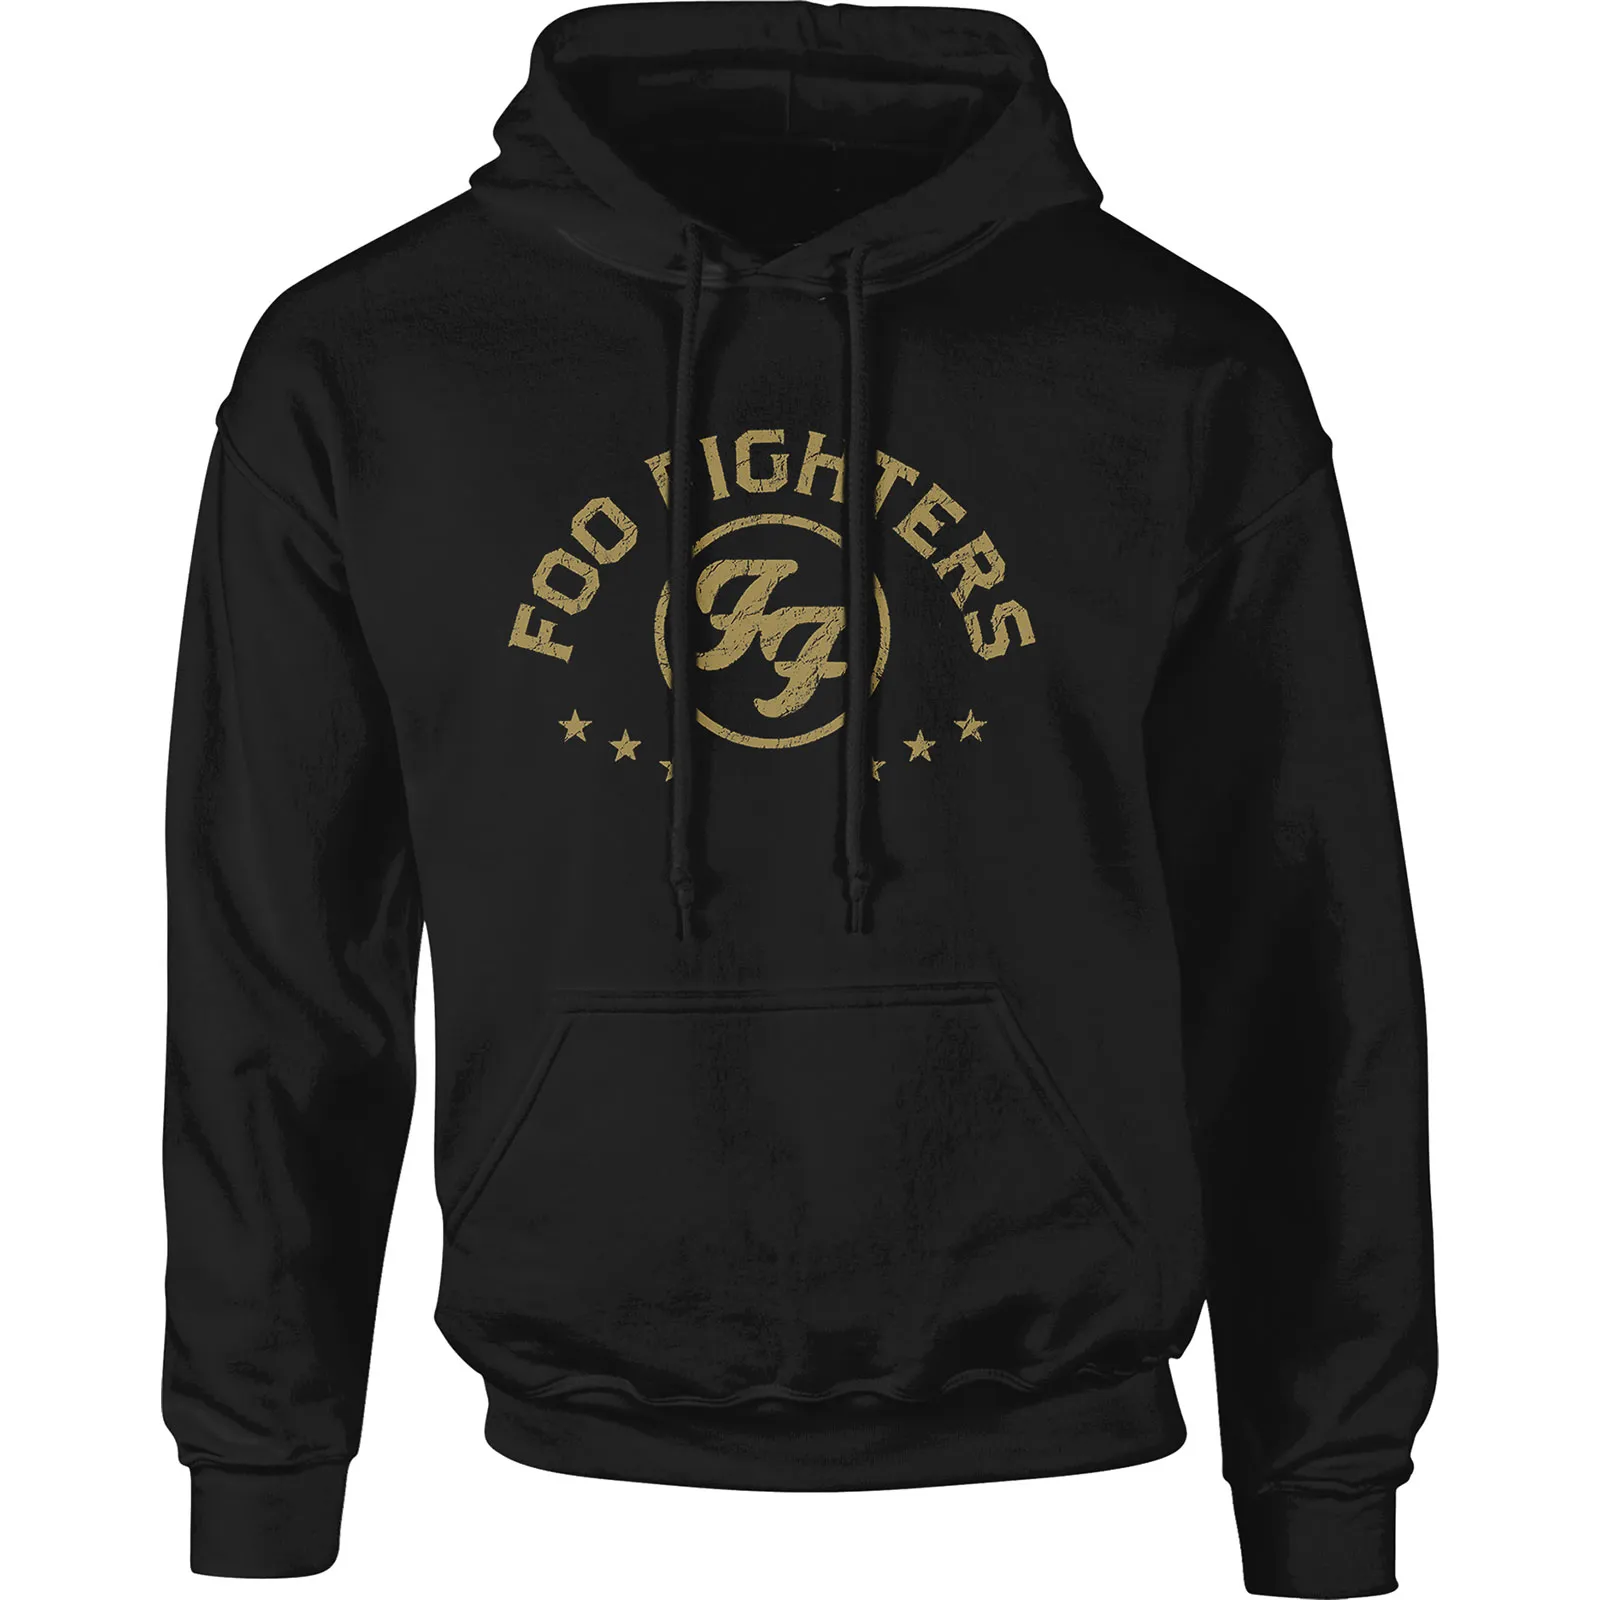 Foo Fighters - Unisex Pullover Hoodie Arched Stars artwork